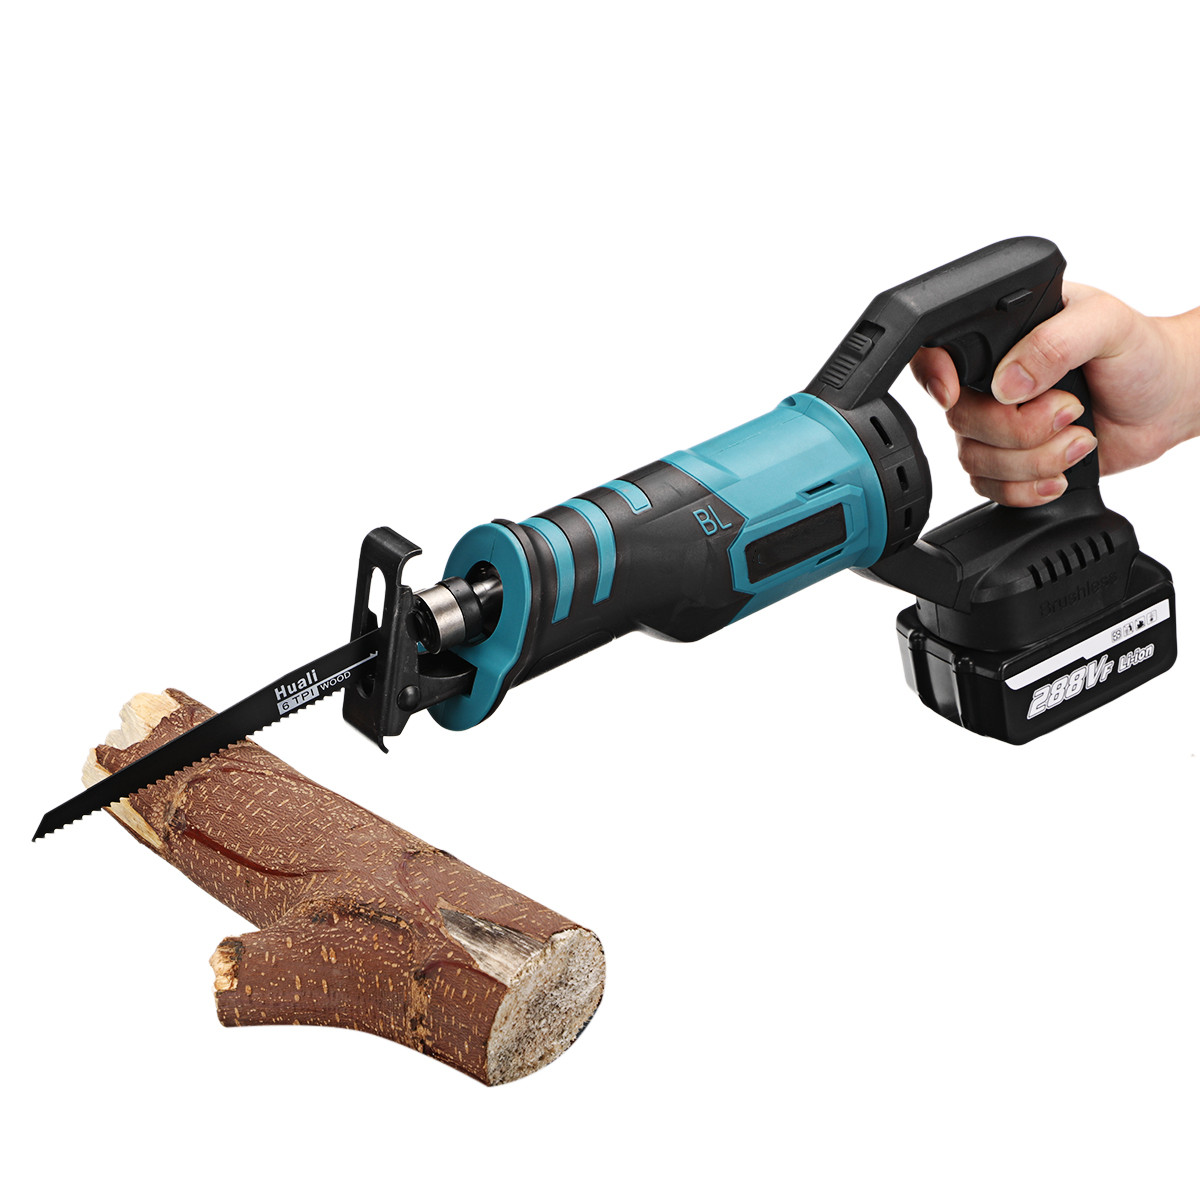 288VF-1200W-Electric-Reciprocating-Saw-Cordless-Chainsaw-One-Hand-Saw-Cutting-Woodworking-Tools-W-1--1874831-1